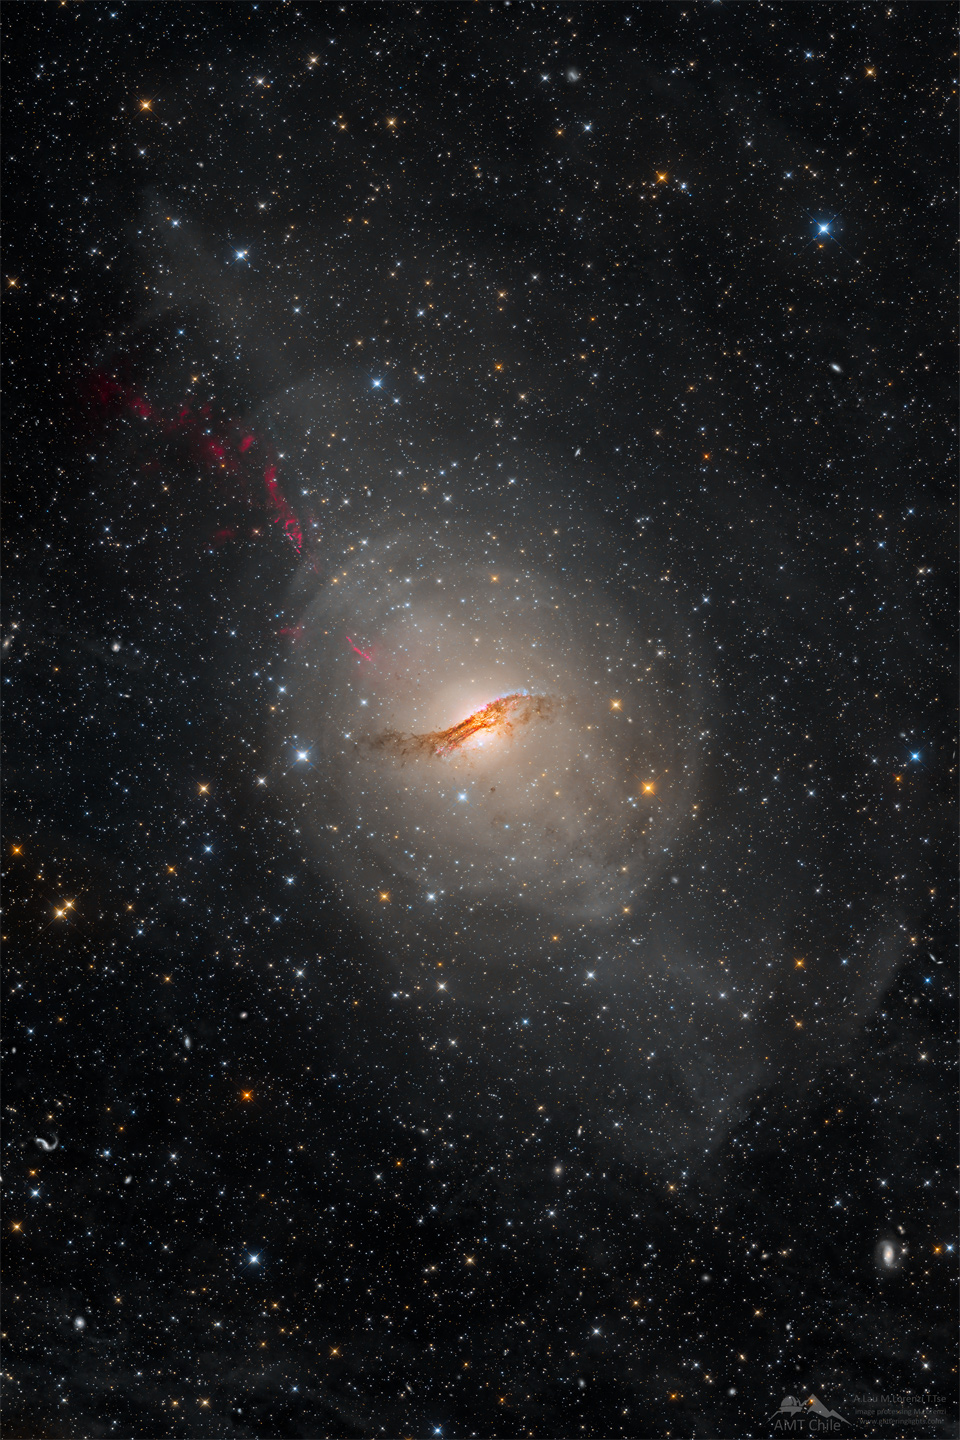 A long duration image of the unusual galaxy Centaurus A.
The galaxy appears as a light oval with a complex dark dust
lane running across its centre. A starfield surrounds the galaxy.
Please see the explanation for more detailed information.